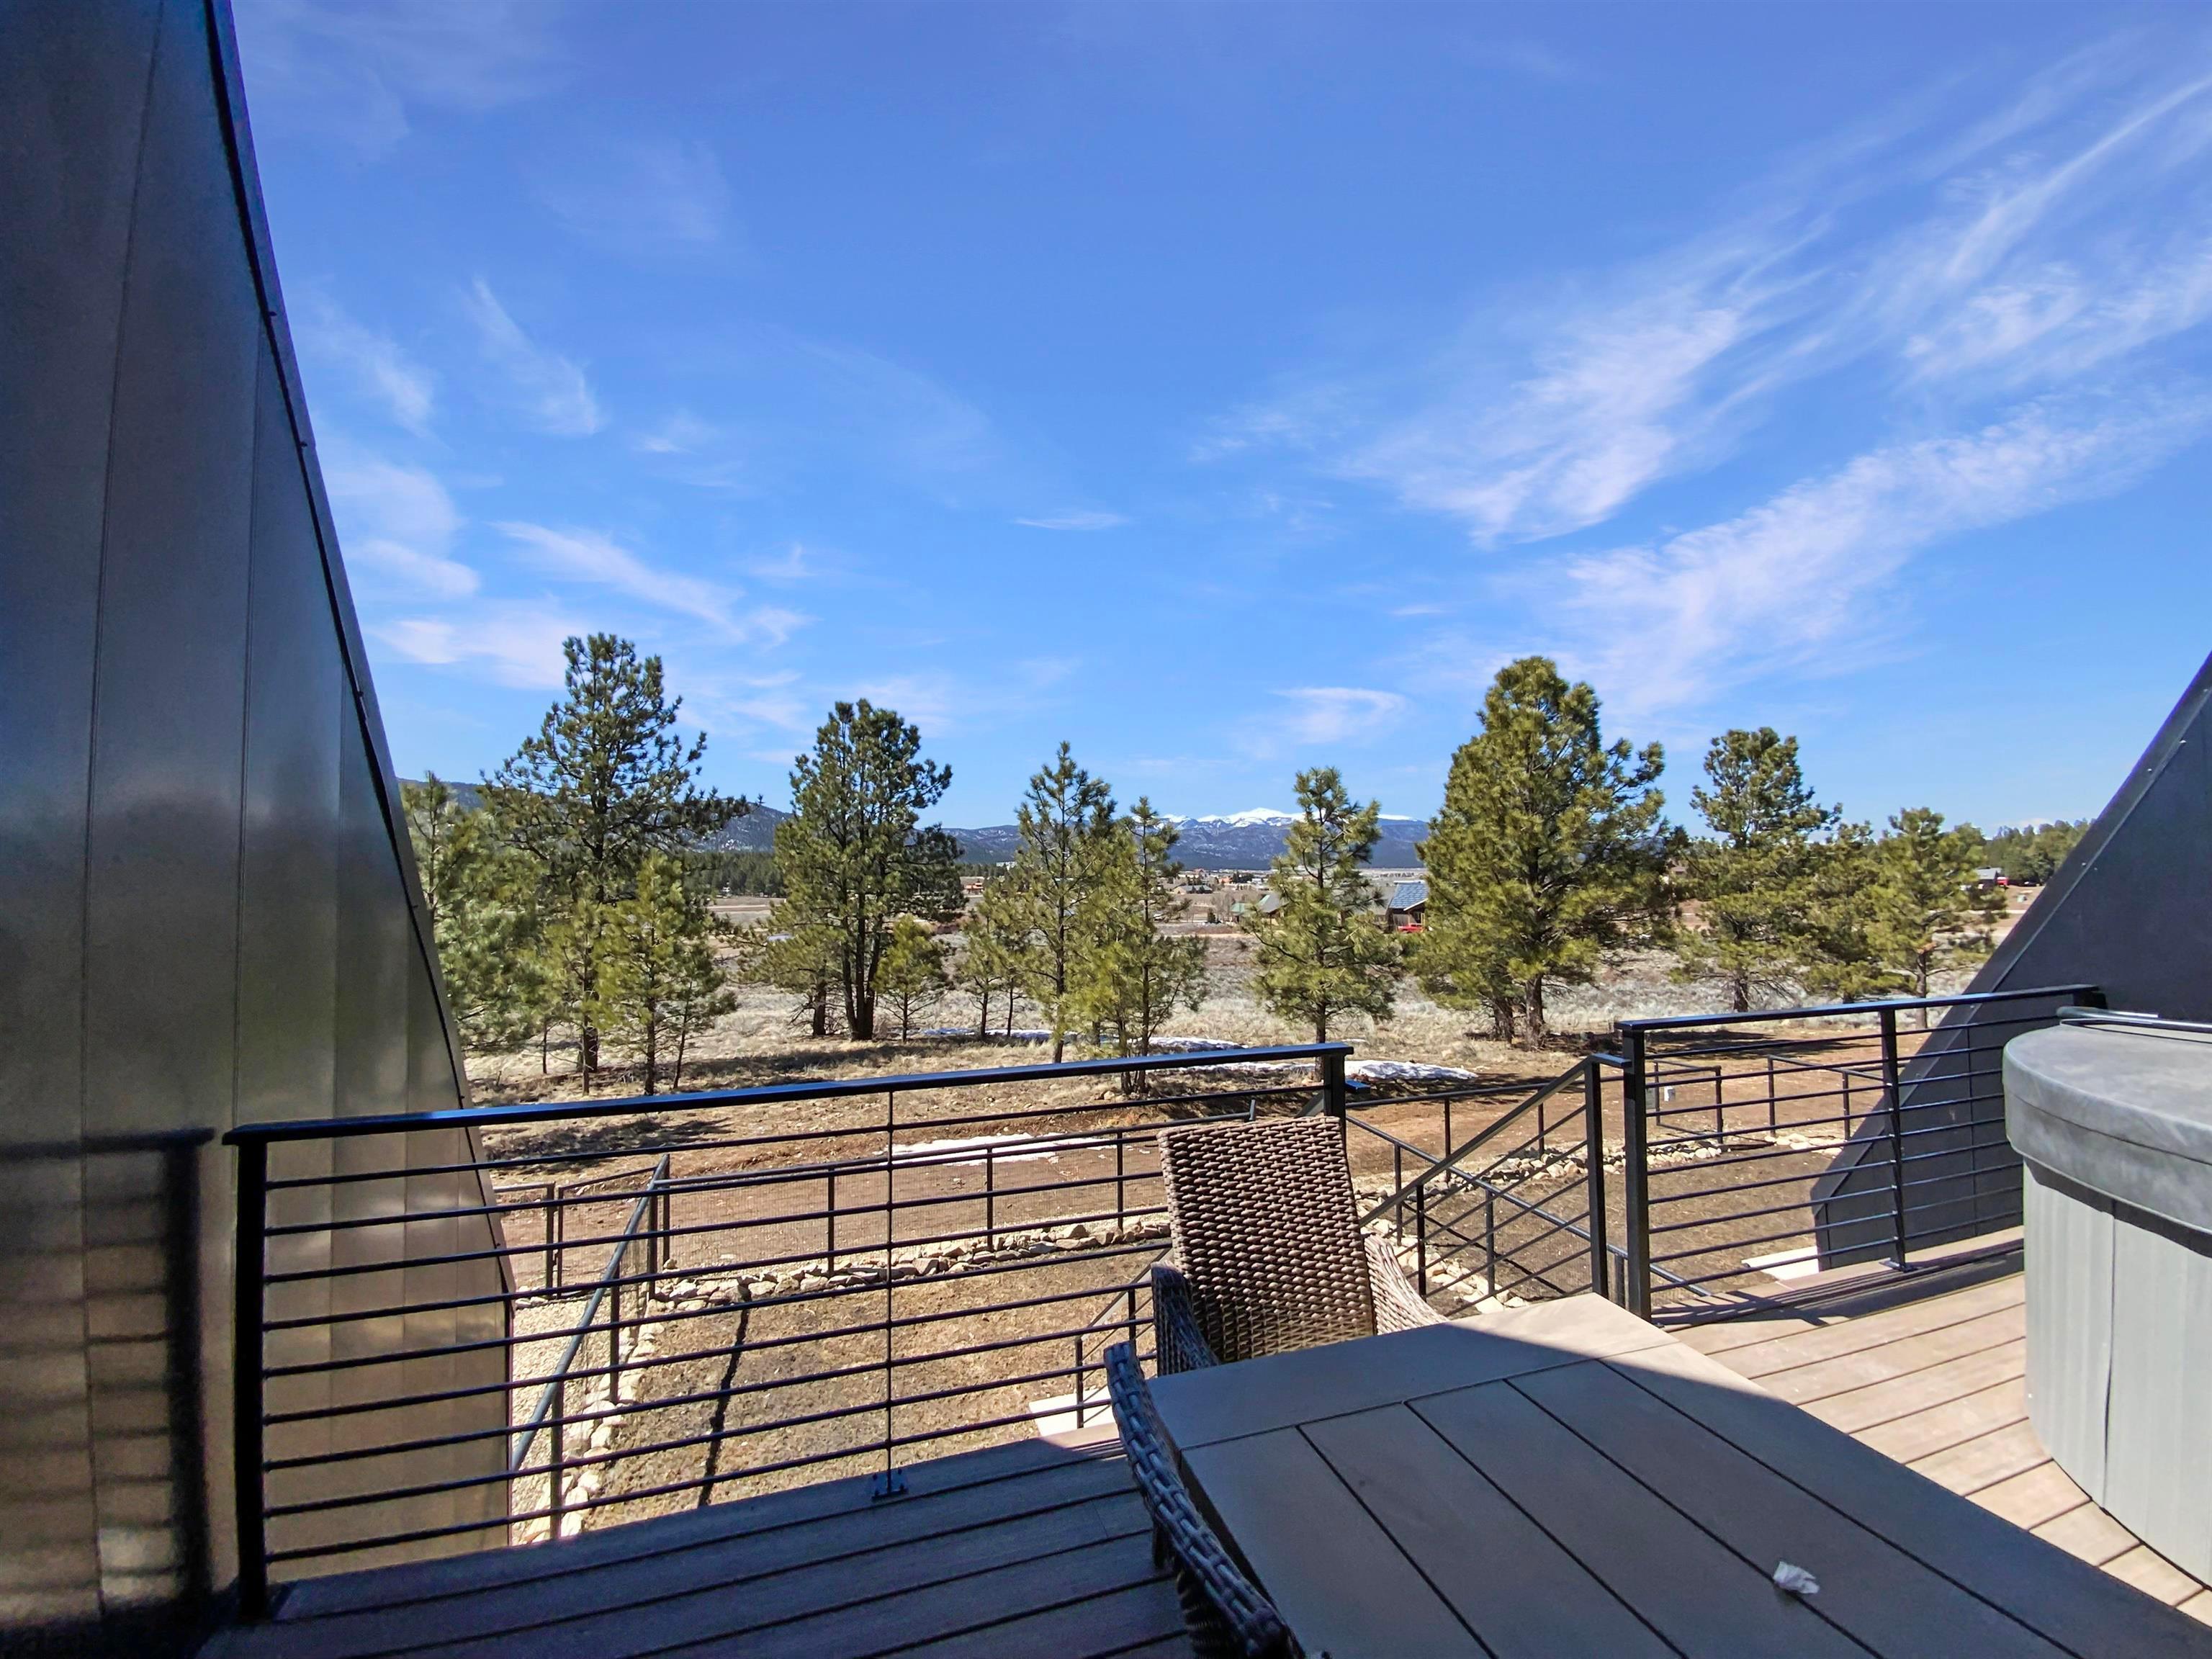 18 S Angel Fire Rd Unit 8 8, Angel Fire, New Mexico, 87710, United States, 4 Bedrooms Bedrooms, ,5 BathroomsBathrooms,Residential,For Sale,18 S Angel Fire Rd Unit 8 8,1501567